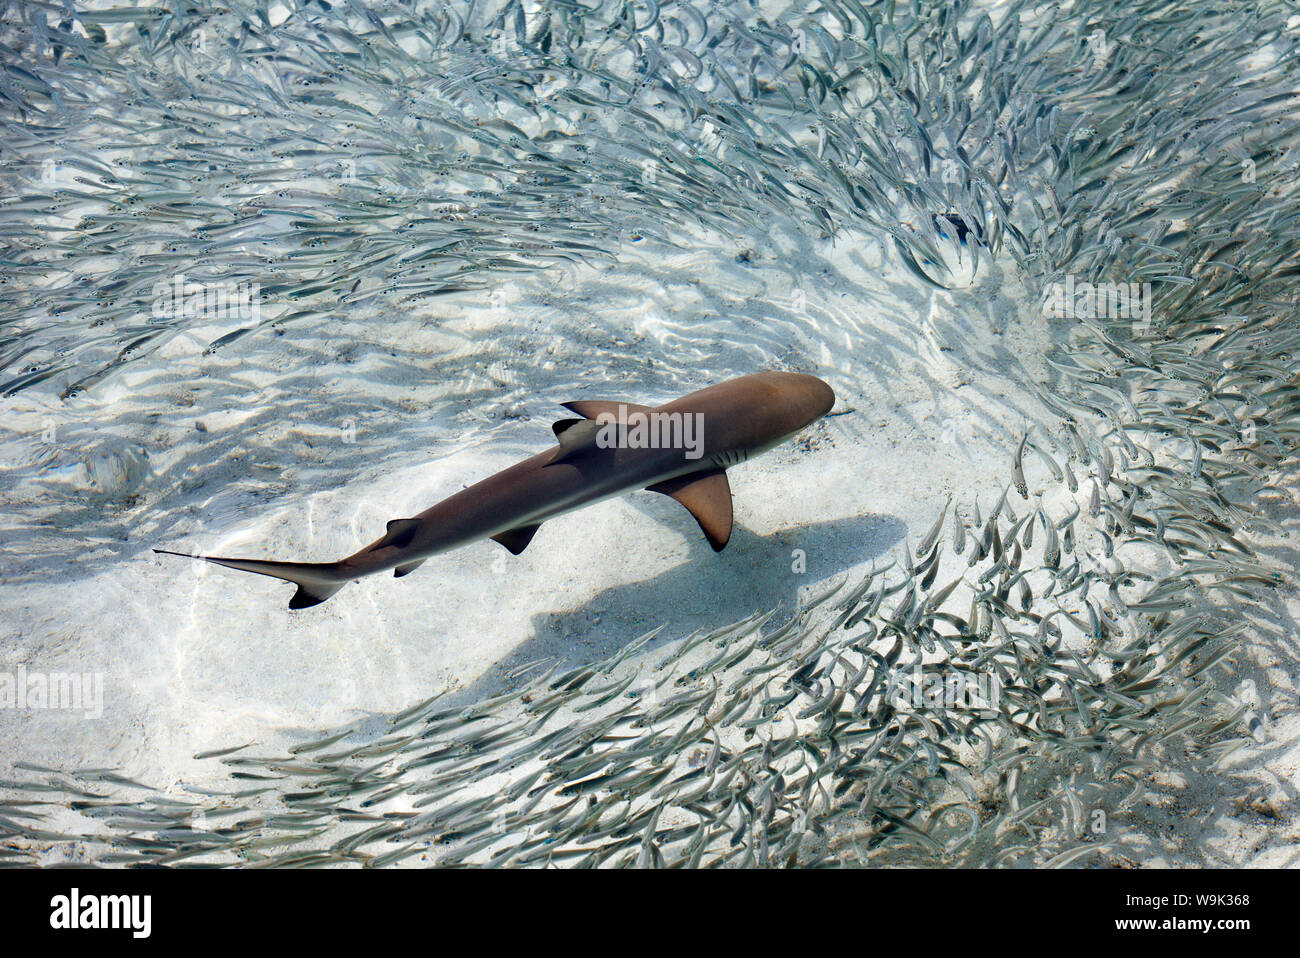 Baby black-tip reef shark being surrounded by a school of silver sprats in a shallow lagoon, Maldives, Indian Ocean, Asia Stock Photo